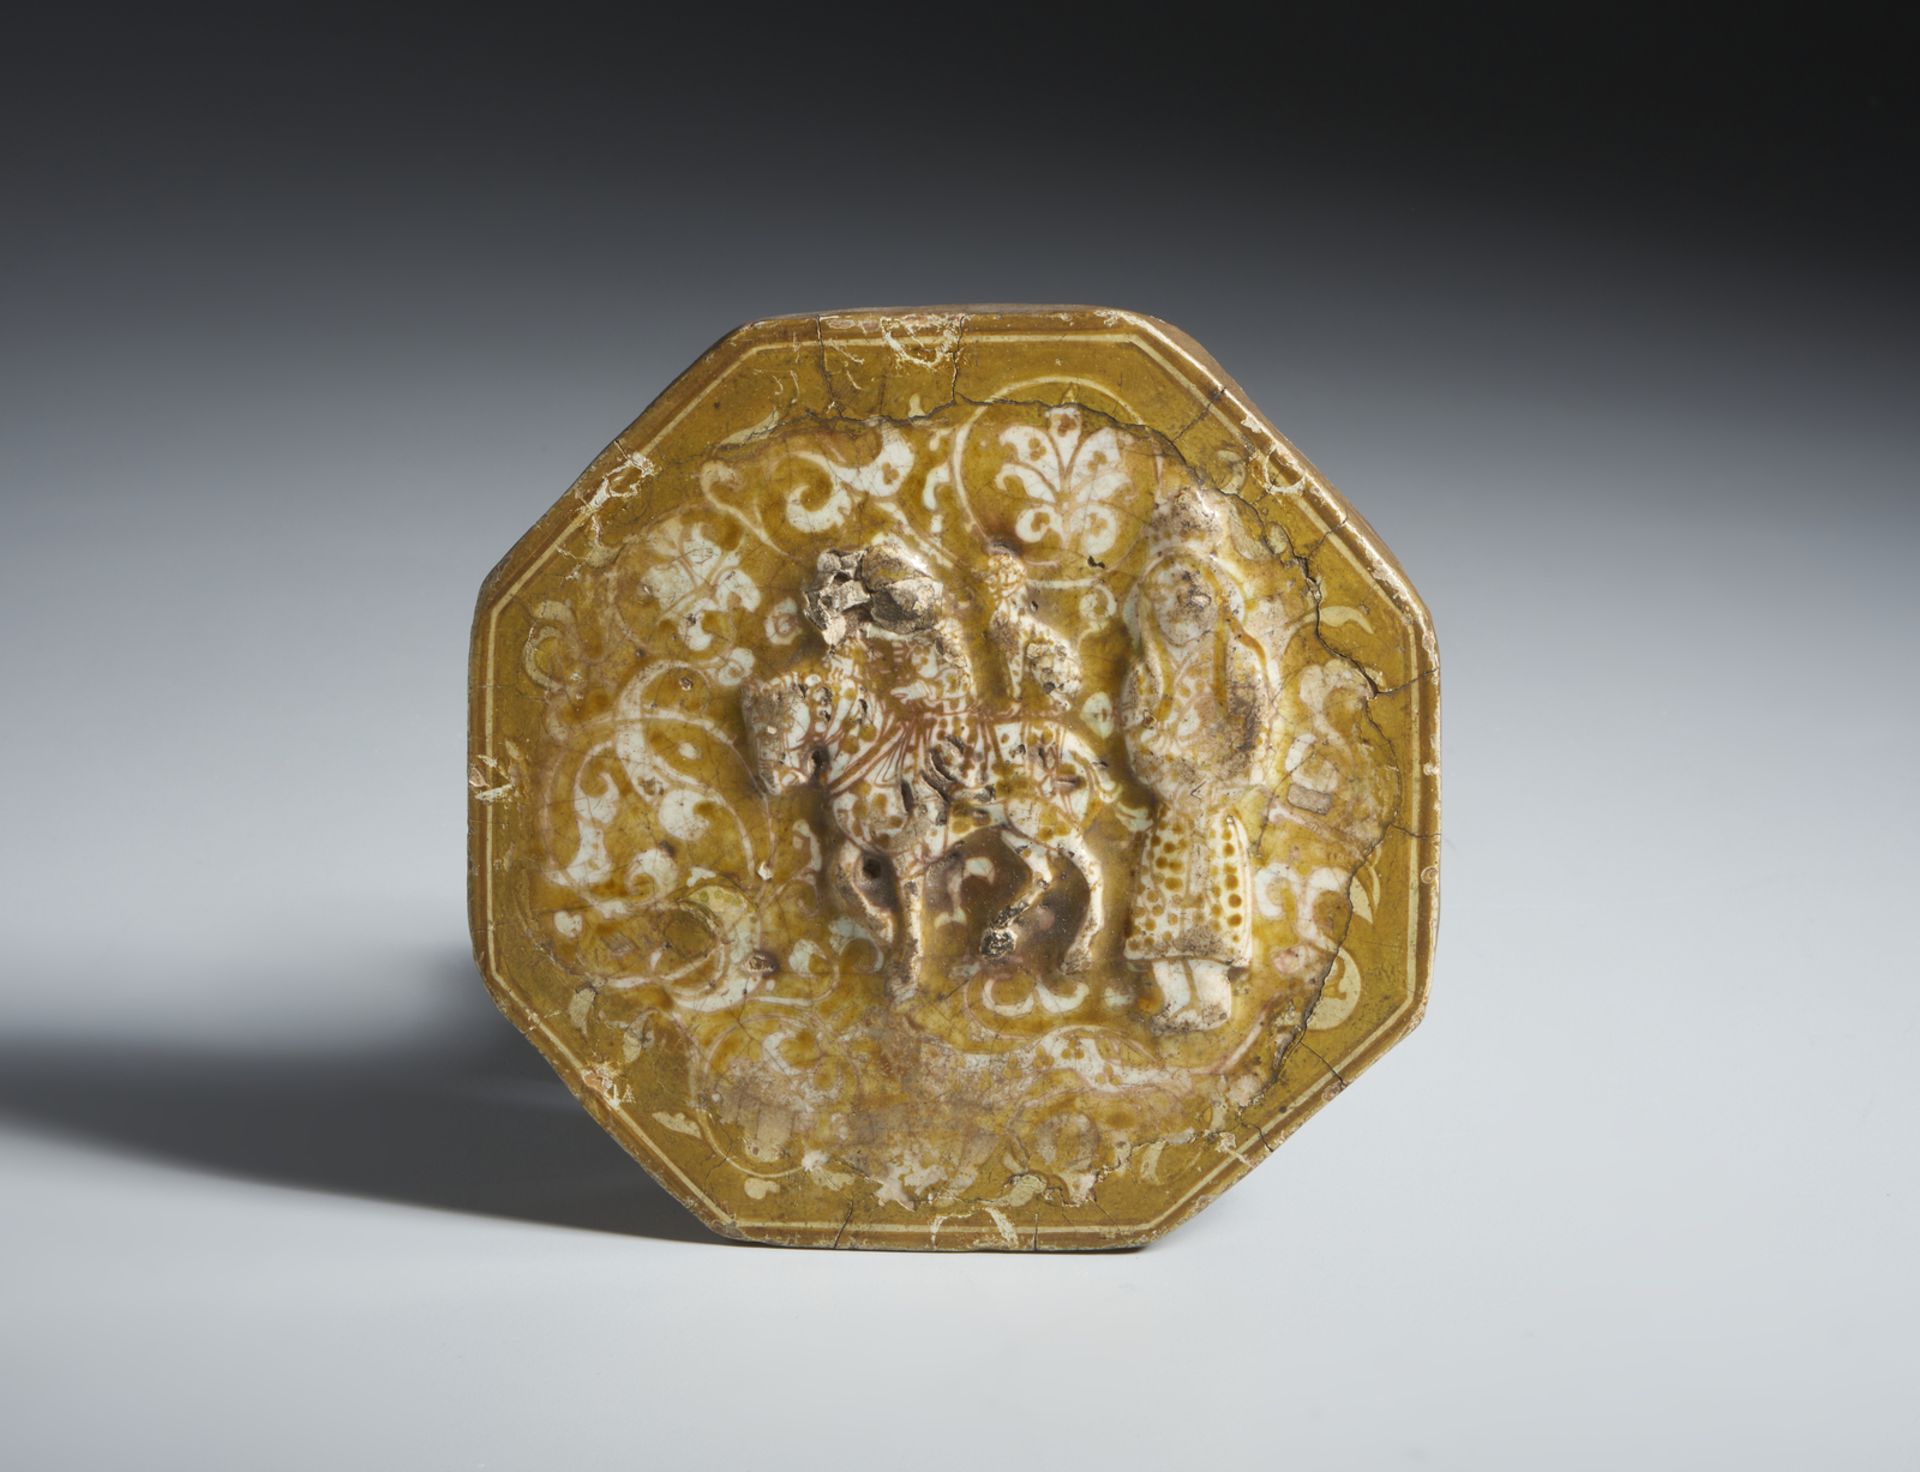 Octagonal tile with figurative decoration in relief Iran, 13th-14th century Frit body, moulded